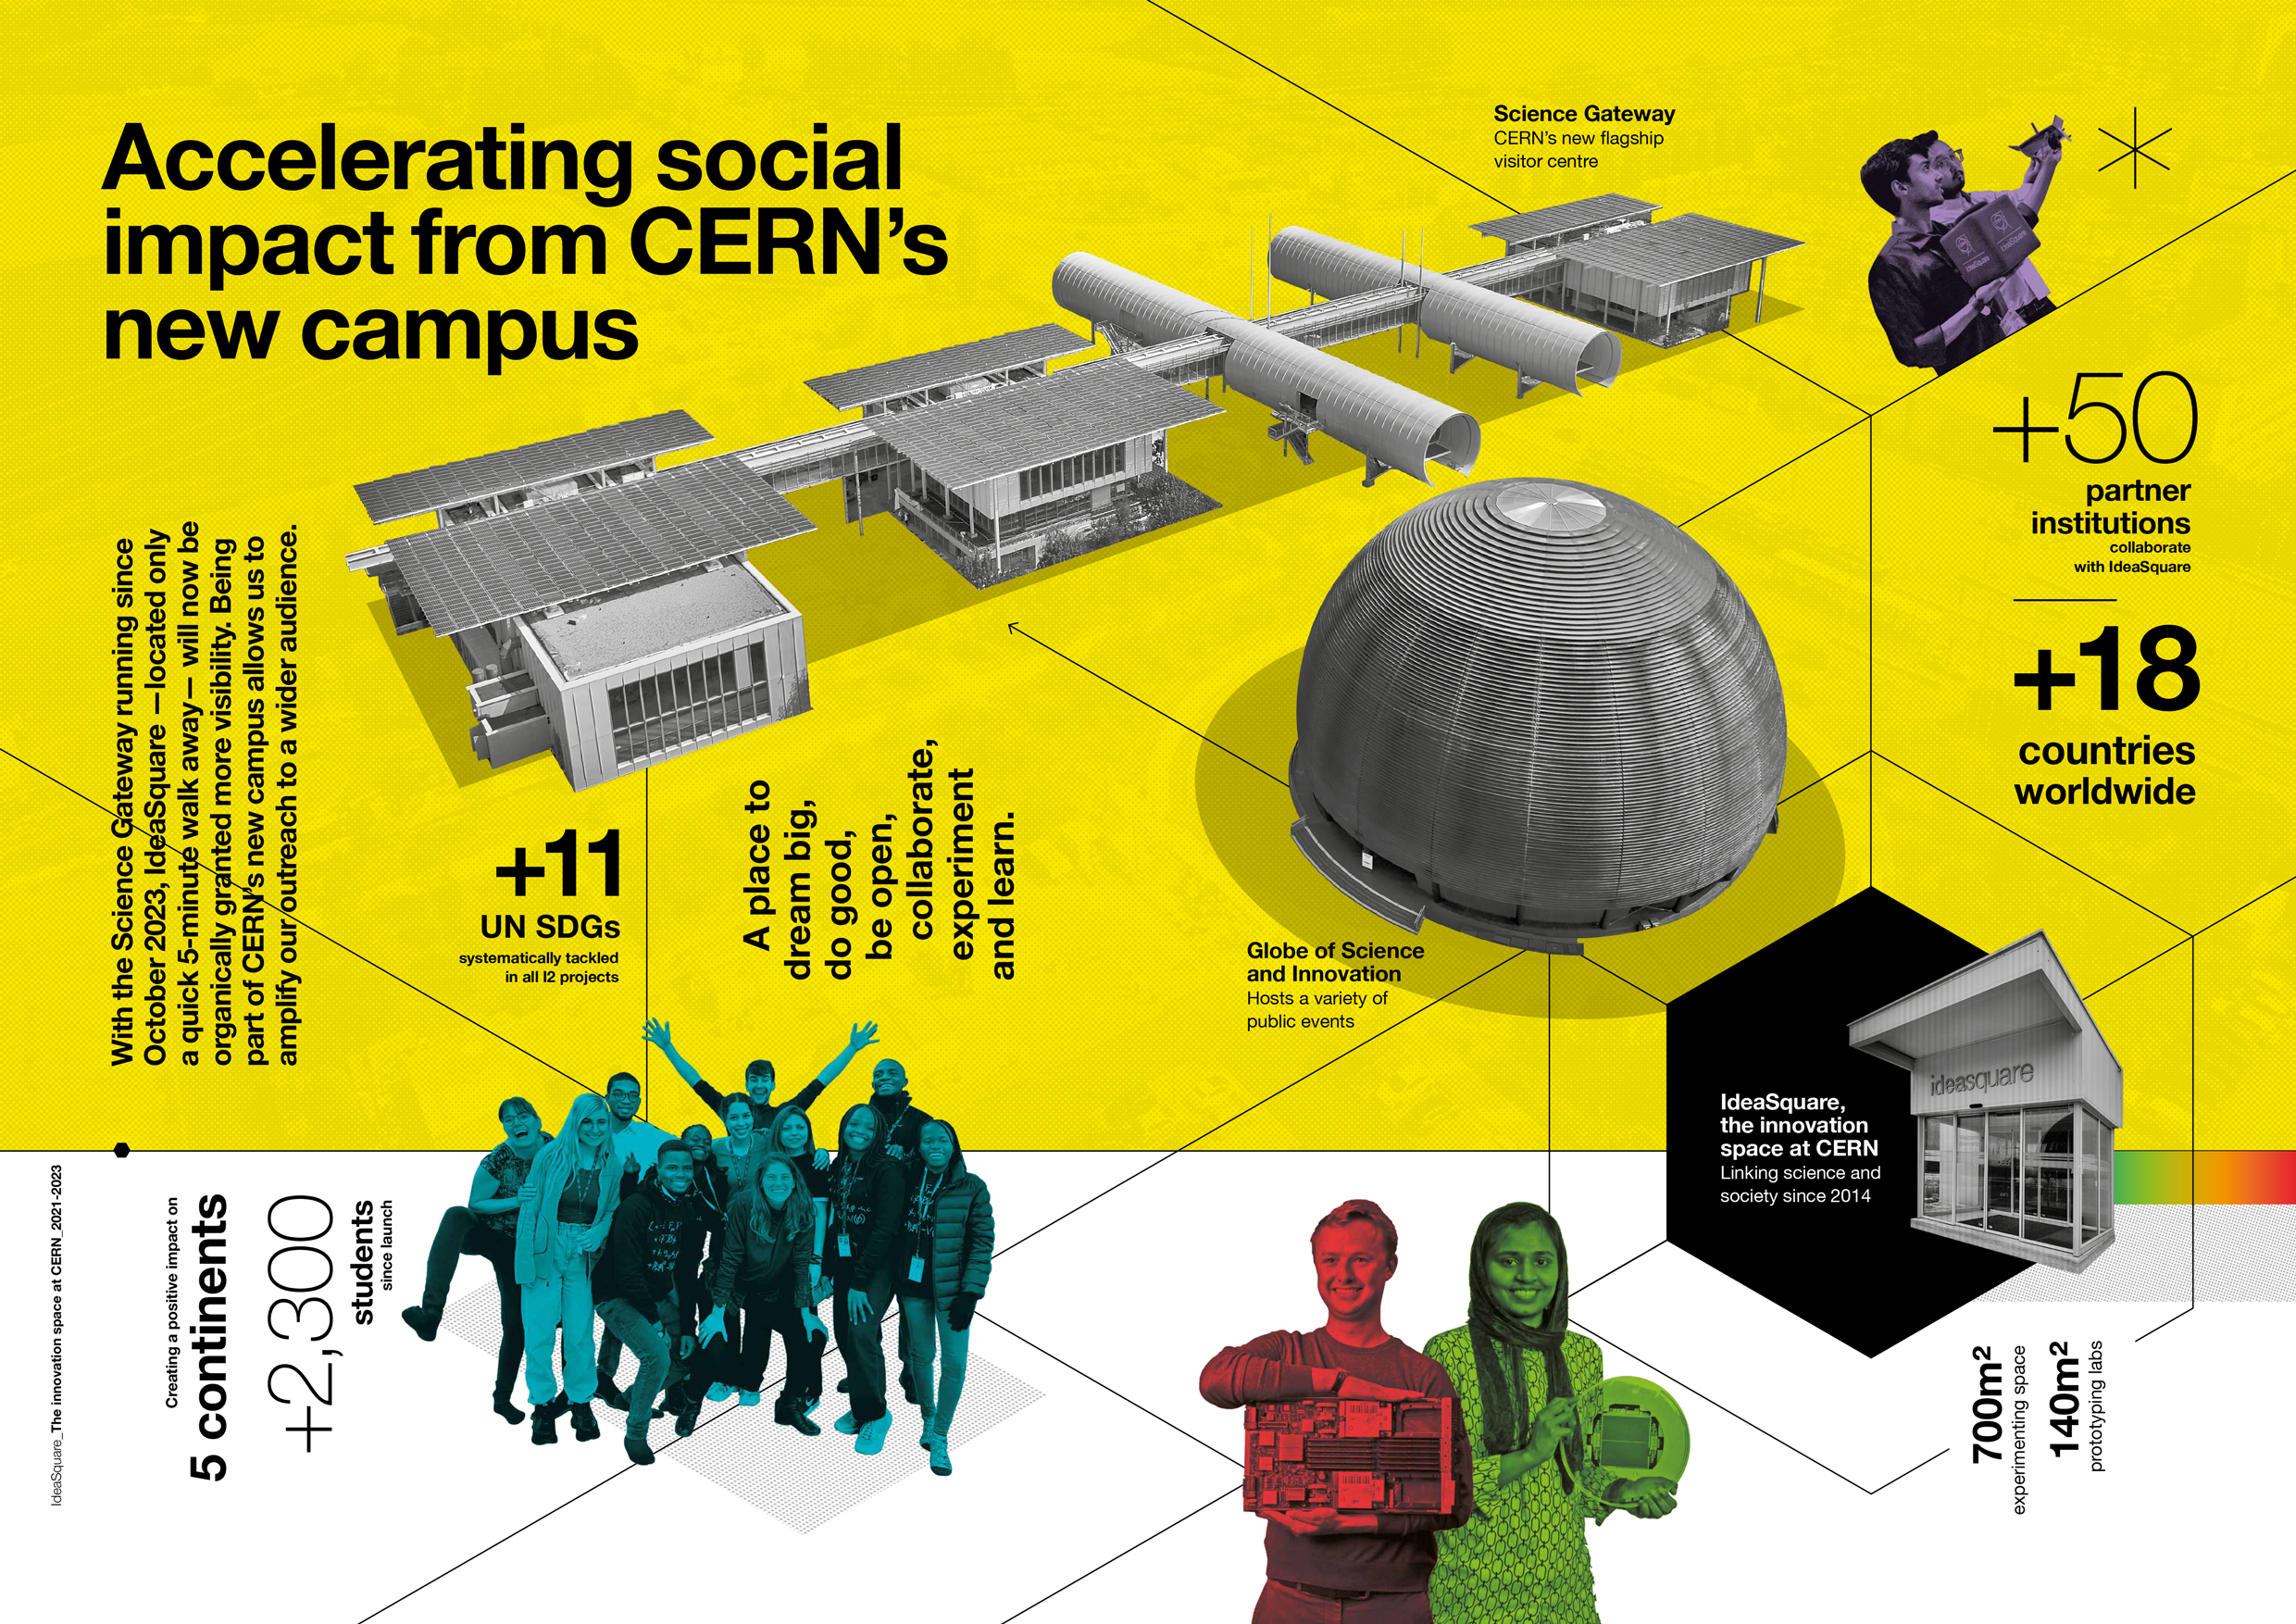 IdeaSquare accelerating impact from CERN's new campus